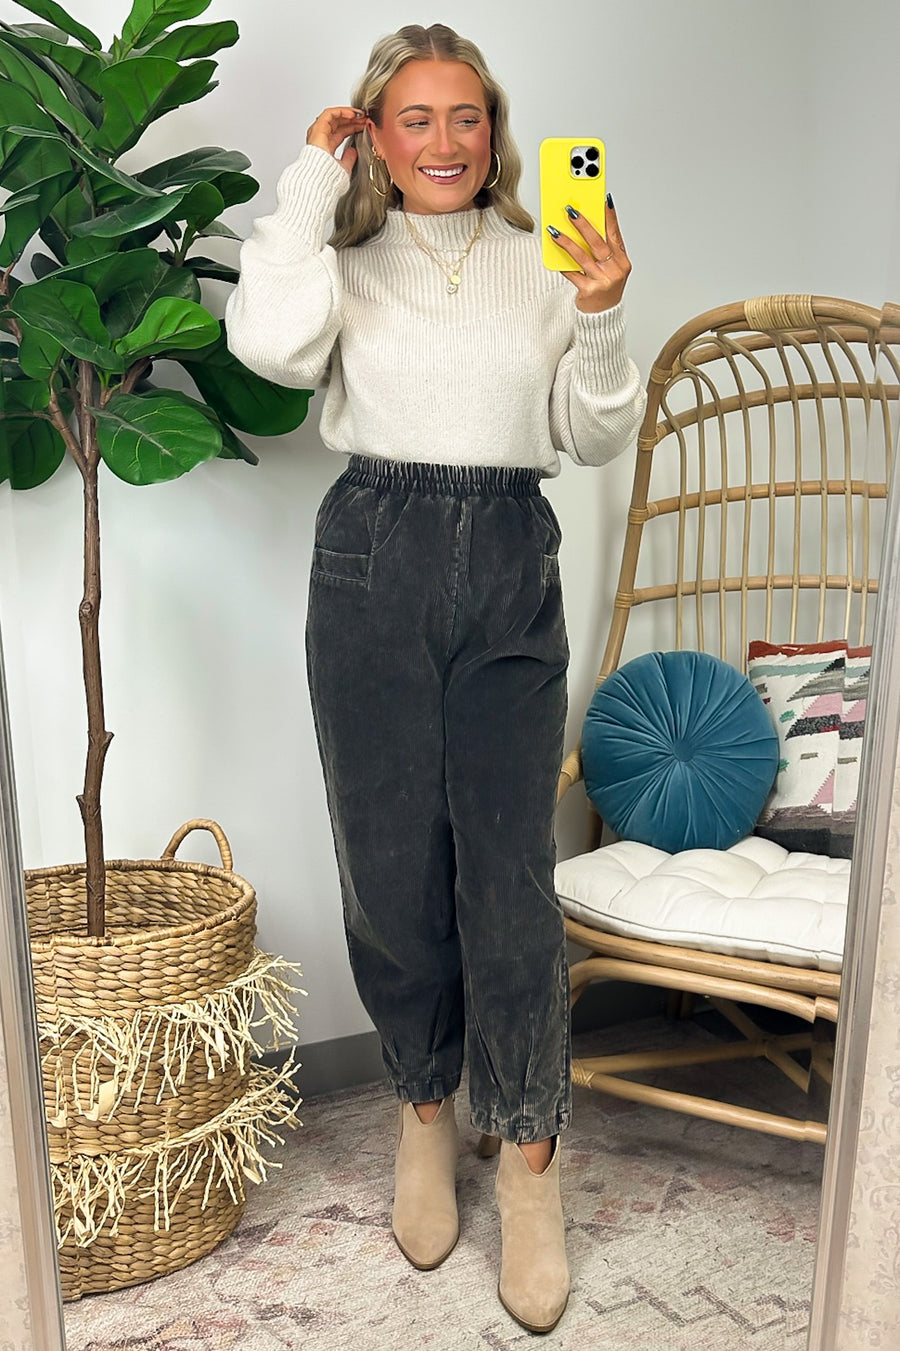  Roxi Mineral Washed Corduroy Cropped Pants - FINAL SALE - Madison and Mallory